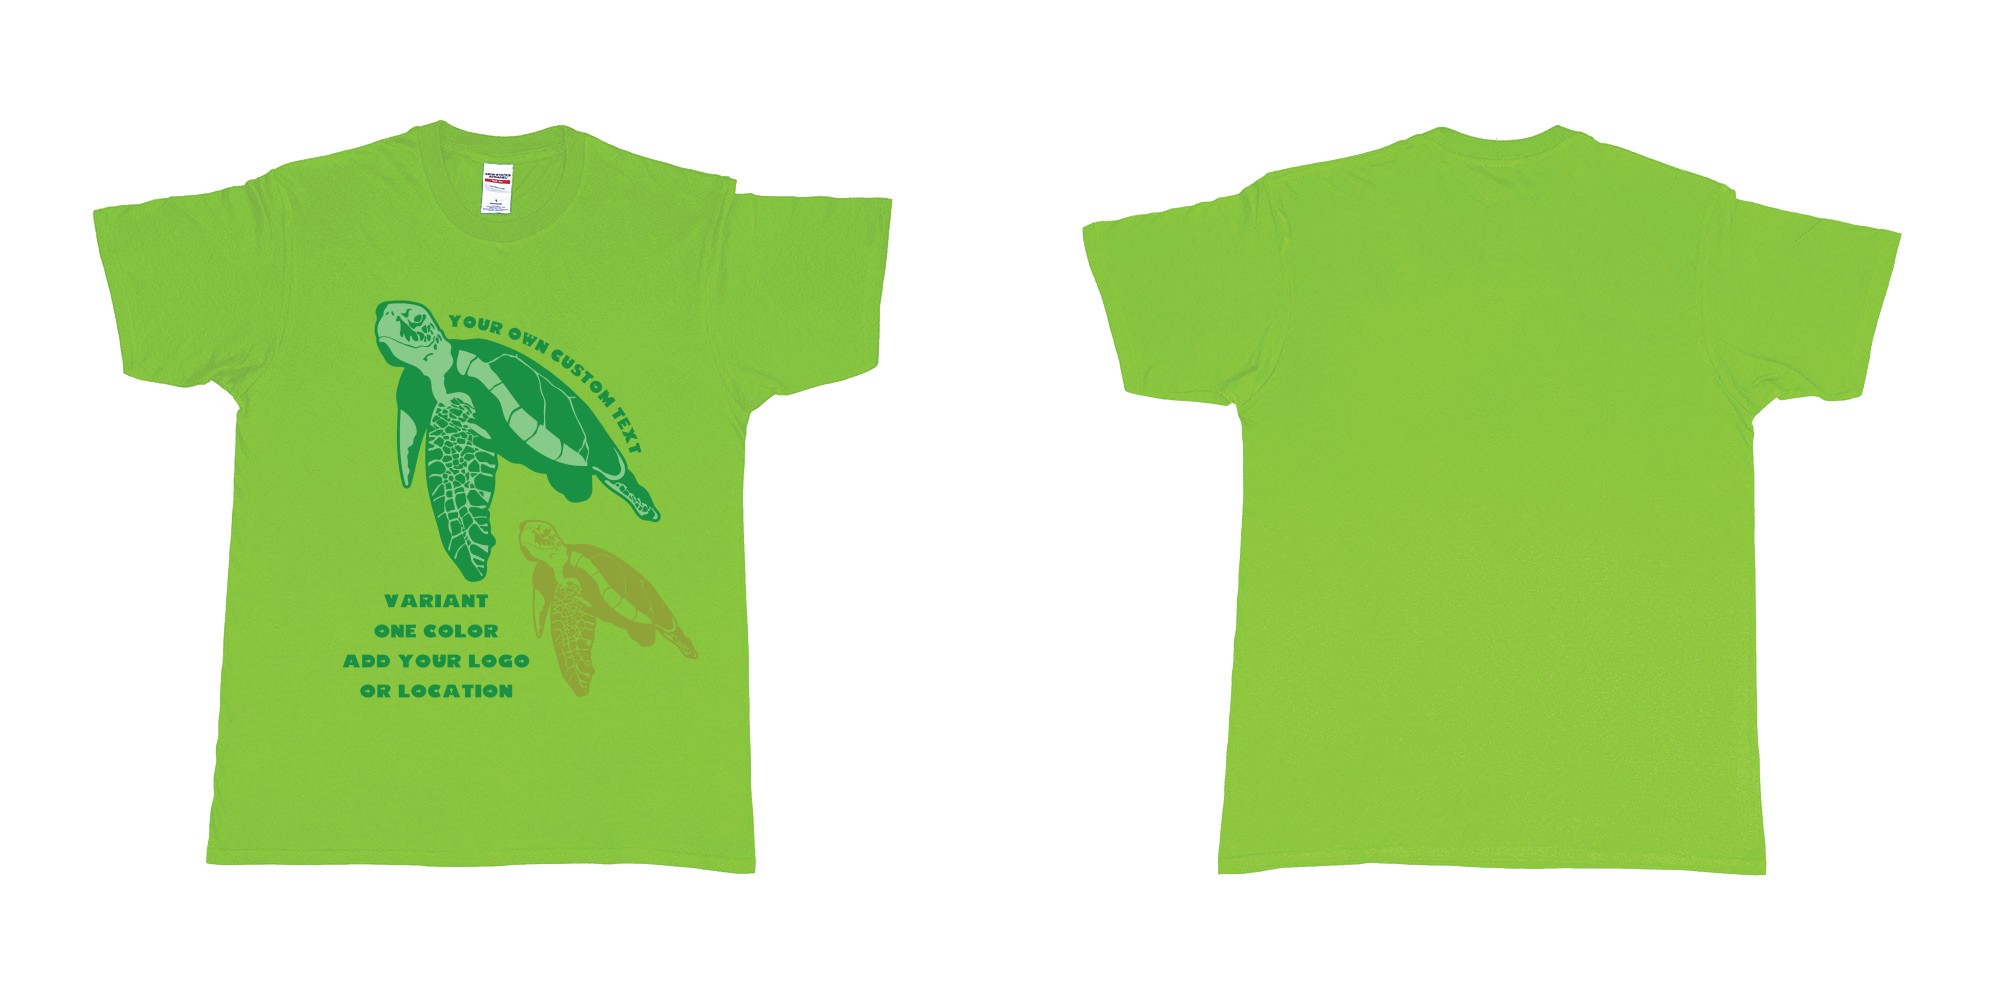 Custom tshirt design hawksbill green sea turtle chilling add logo in fabric color lime choice your own text made in Bali by The Pirate Way